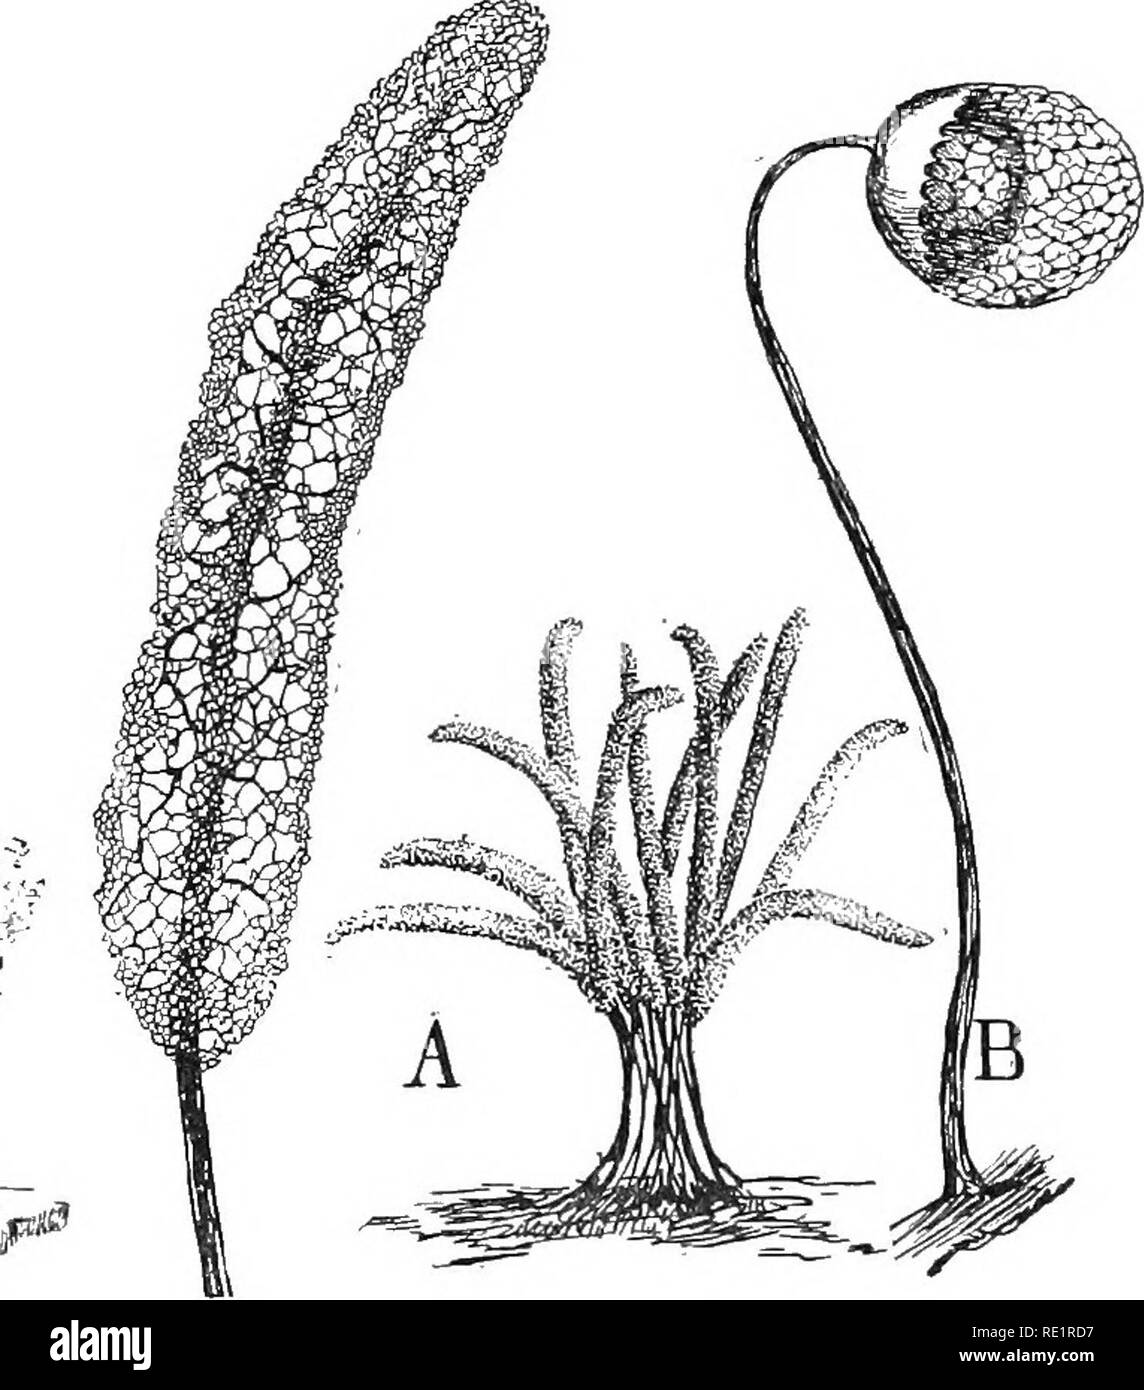 . Nature and development of plants. Botany. Fig. 87. Fig. 88. Fig. 87. The sporangial stage of two common slime moulds: A, Lyco- gala. B, Arcyria. C, sporangia rupturing, hair-like structures (the capil- litium) and spores protruding. D, sporangia emptied. Fig. 88. Open types of sporangia: A, Stemonitis, at left a single spo- rangium enlarged, showing net-like structure formed by capillitium radiating from the central stalk of the sporangium. B, Cribaria. sacs every time they are tapped, the life history will be found to be about as follows: Under the microscope the particles of dust are seen  Stock Photo